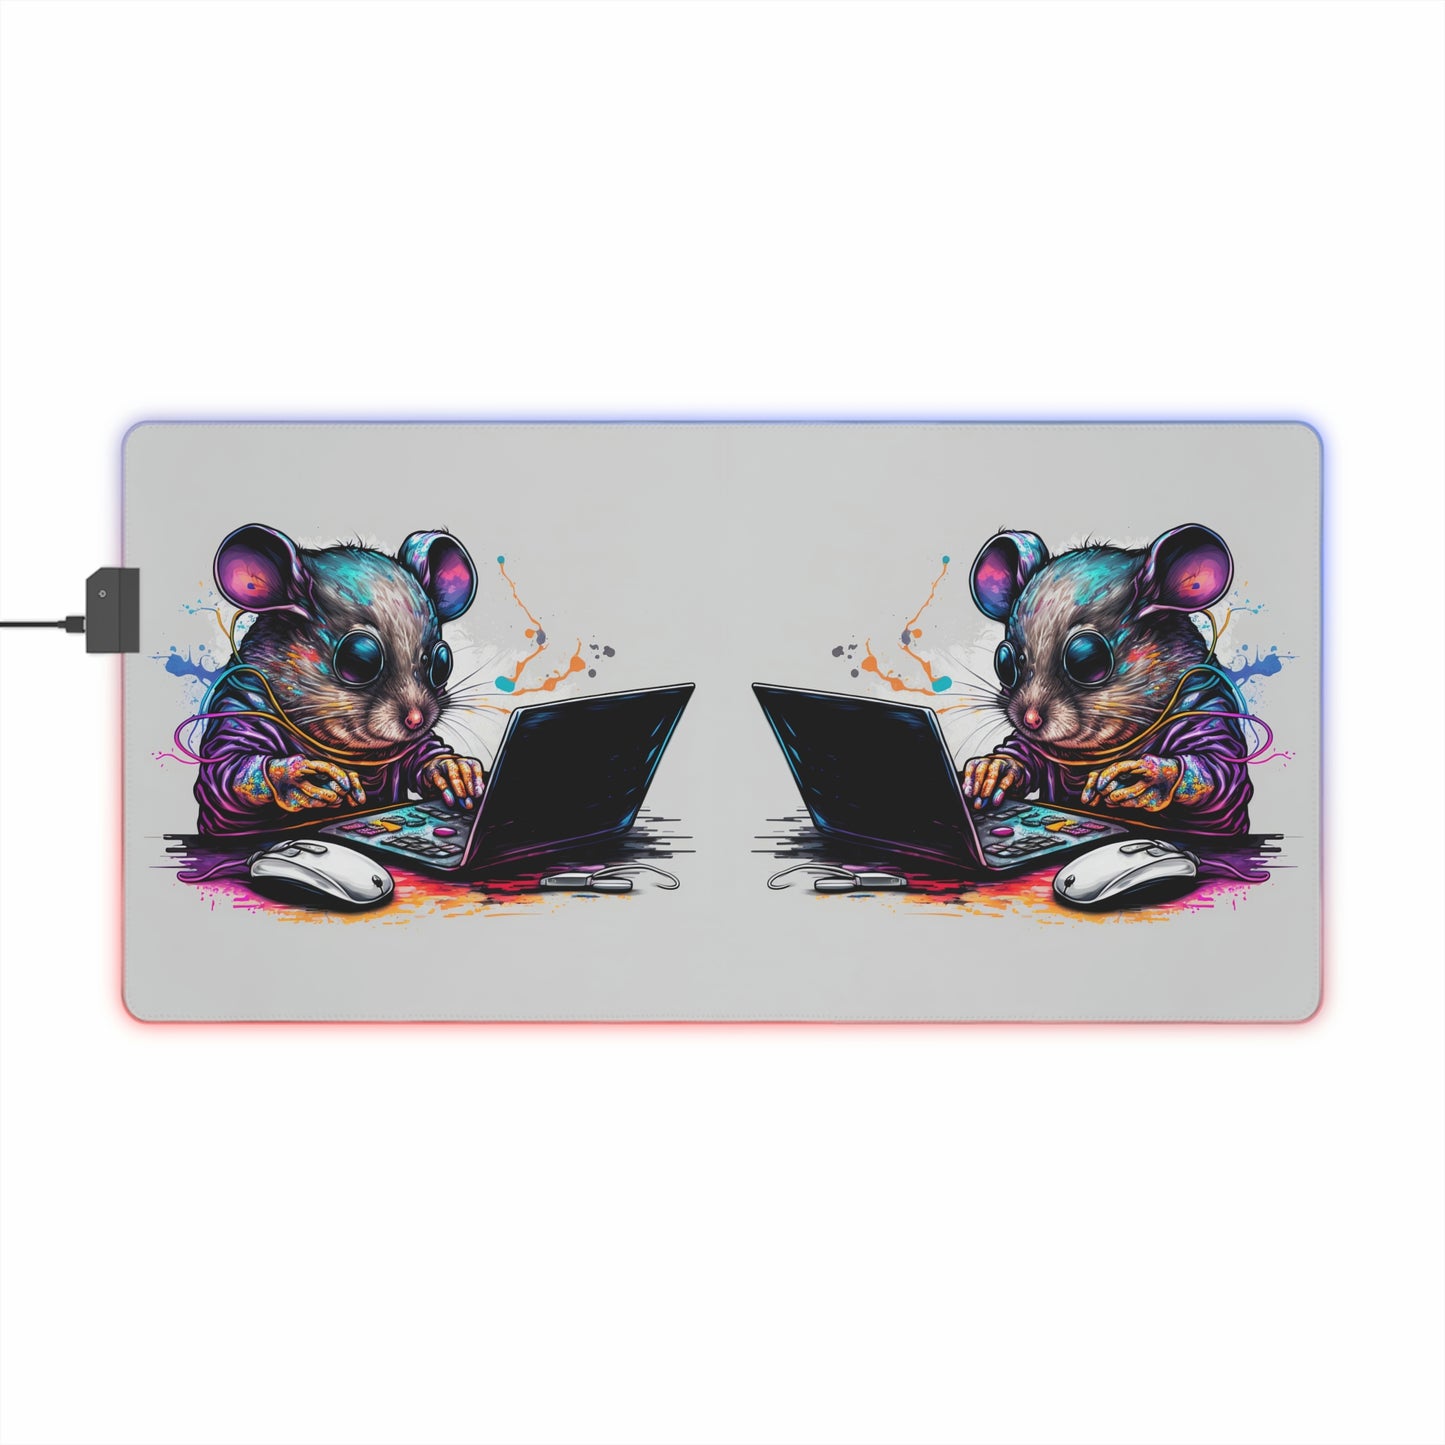 LED Gaming Mouse Pad Neon Mouse 1